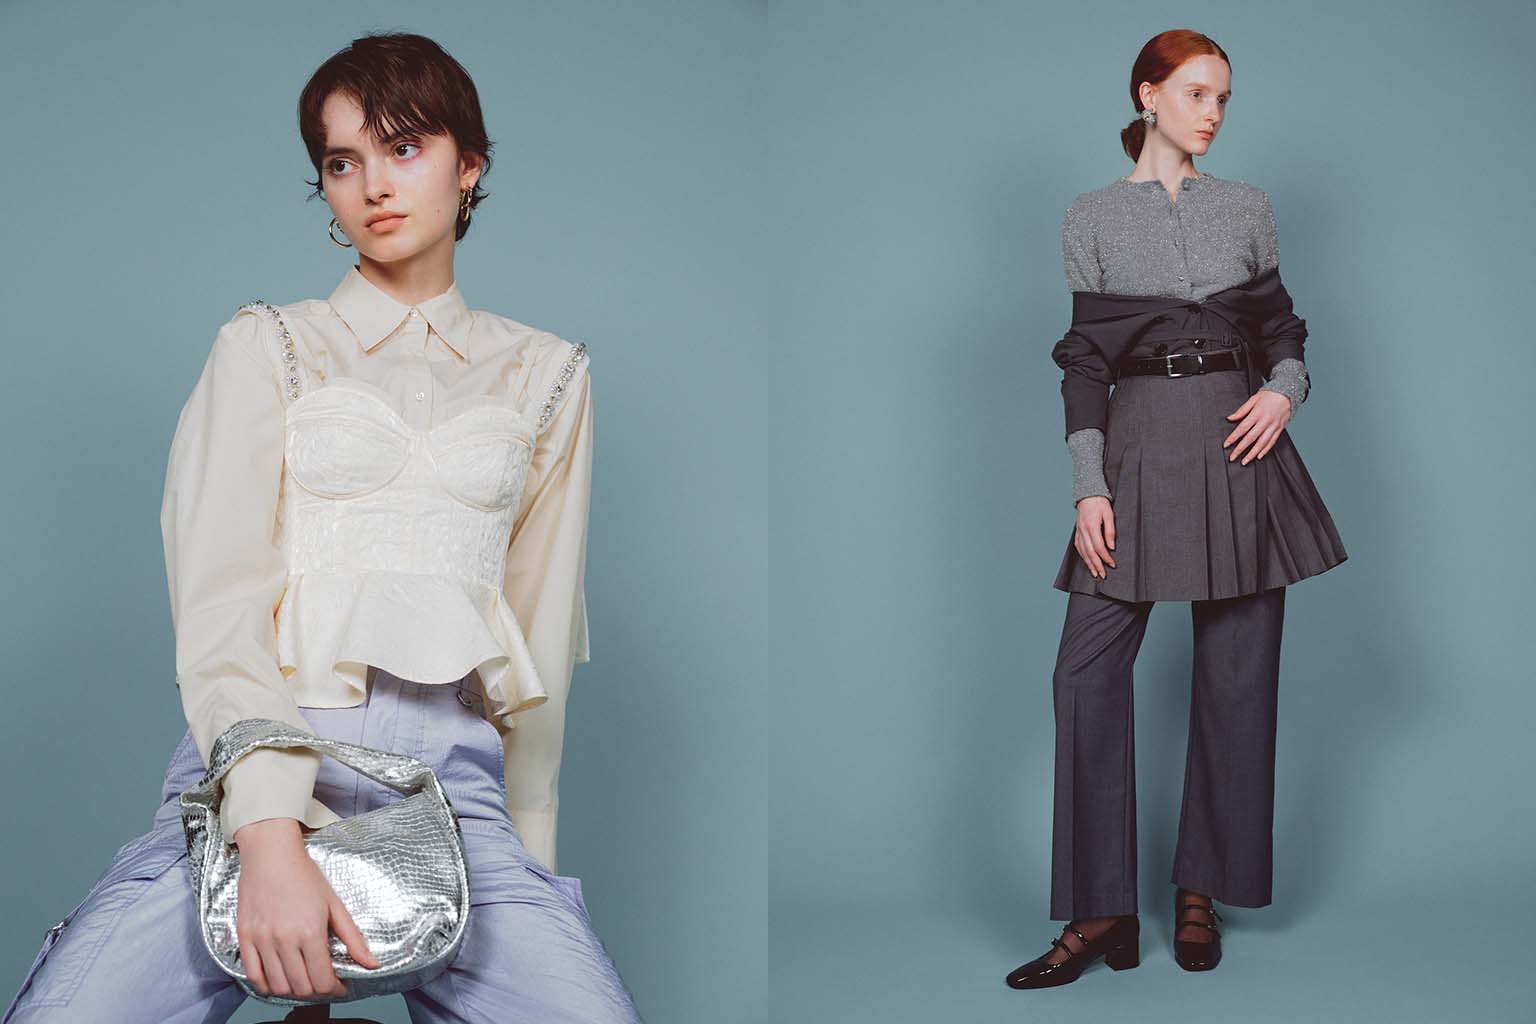 LILY BROWN  23AW  1st Collection